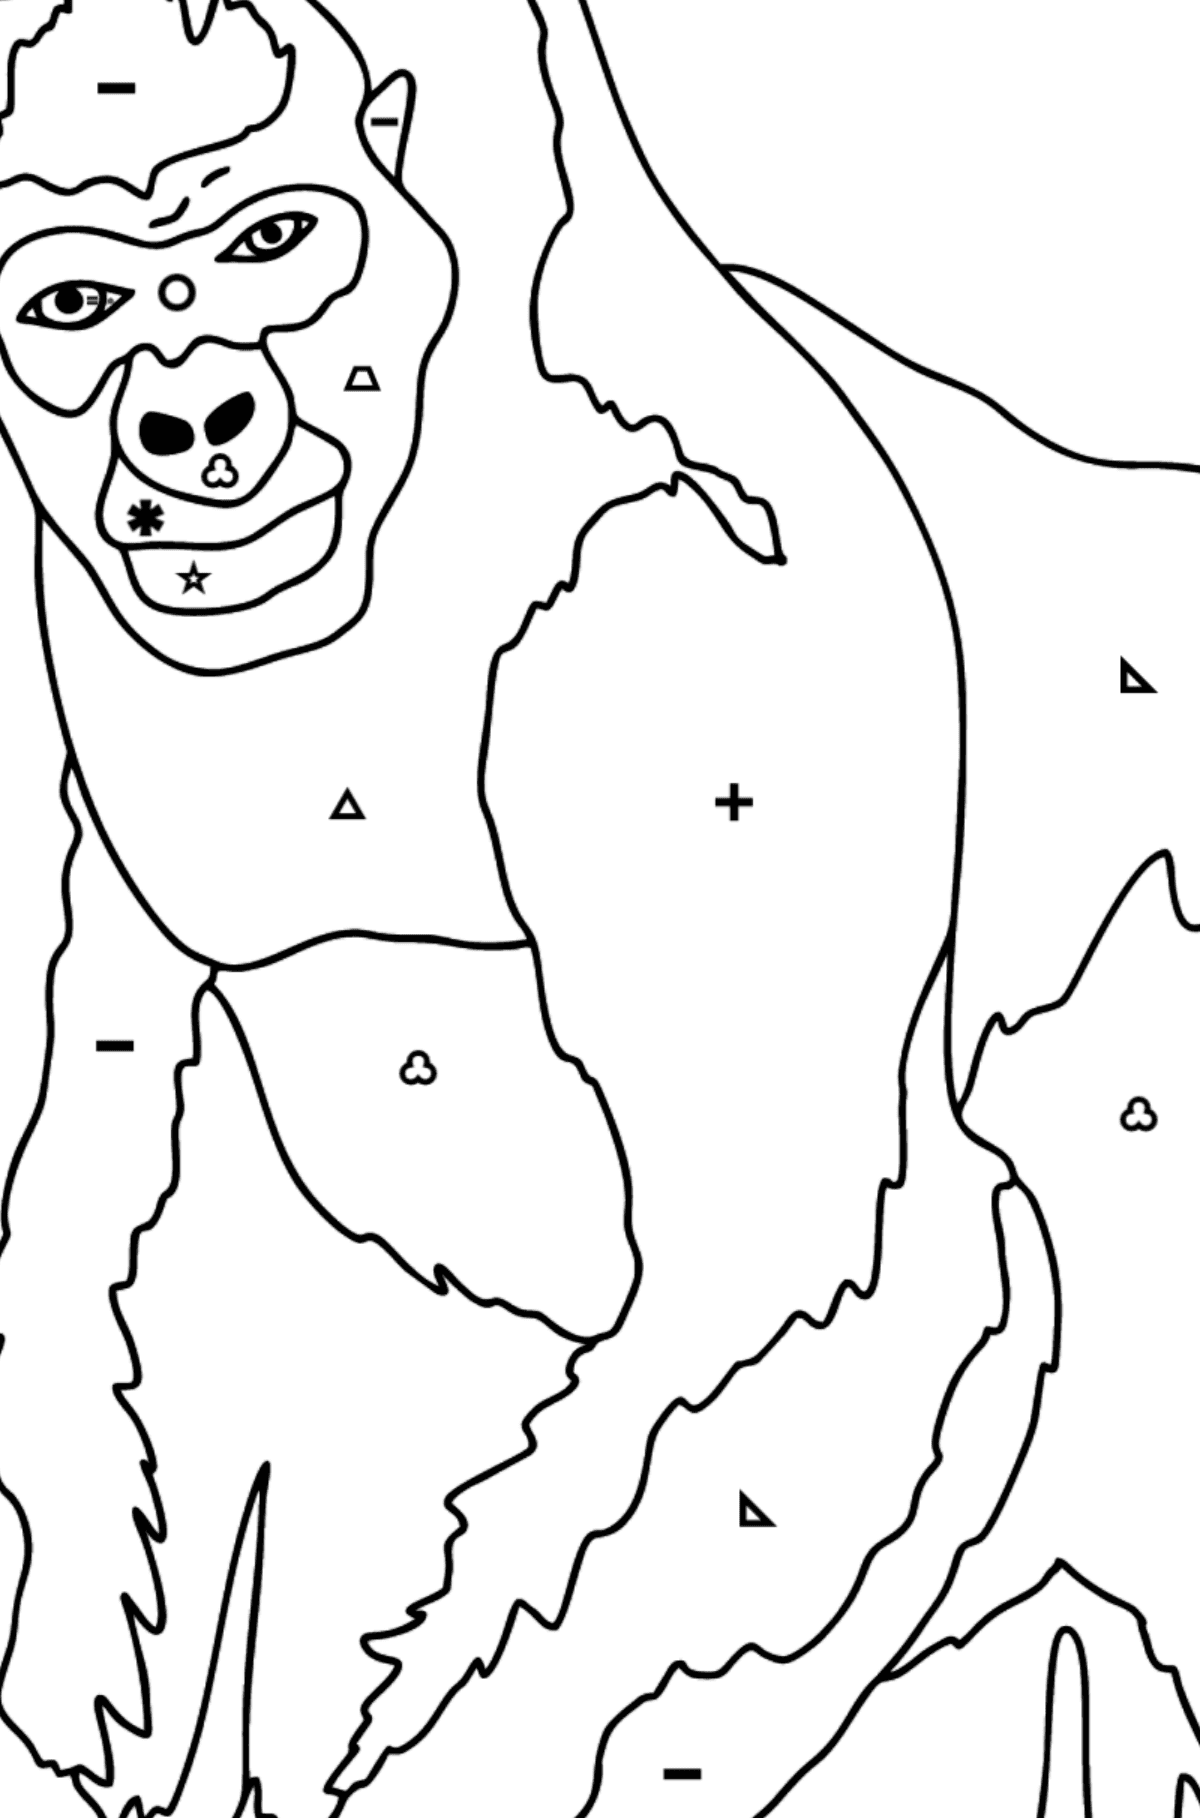 Coloring Page - A Hairy Gorilla - Coloring by Symbols and Geometric Shapes for Kids